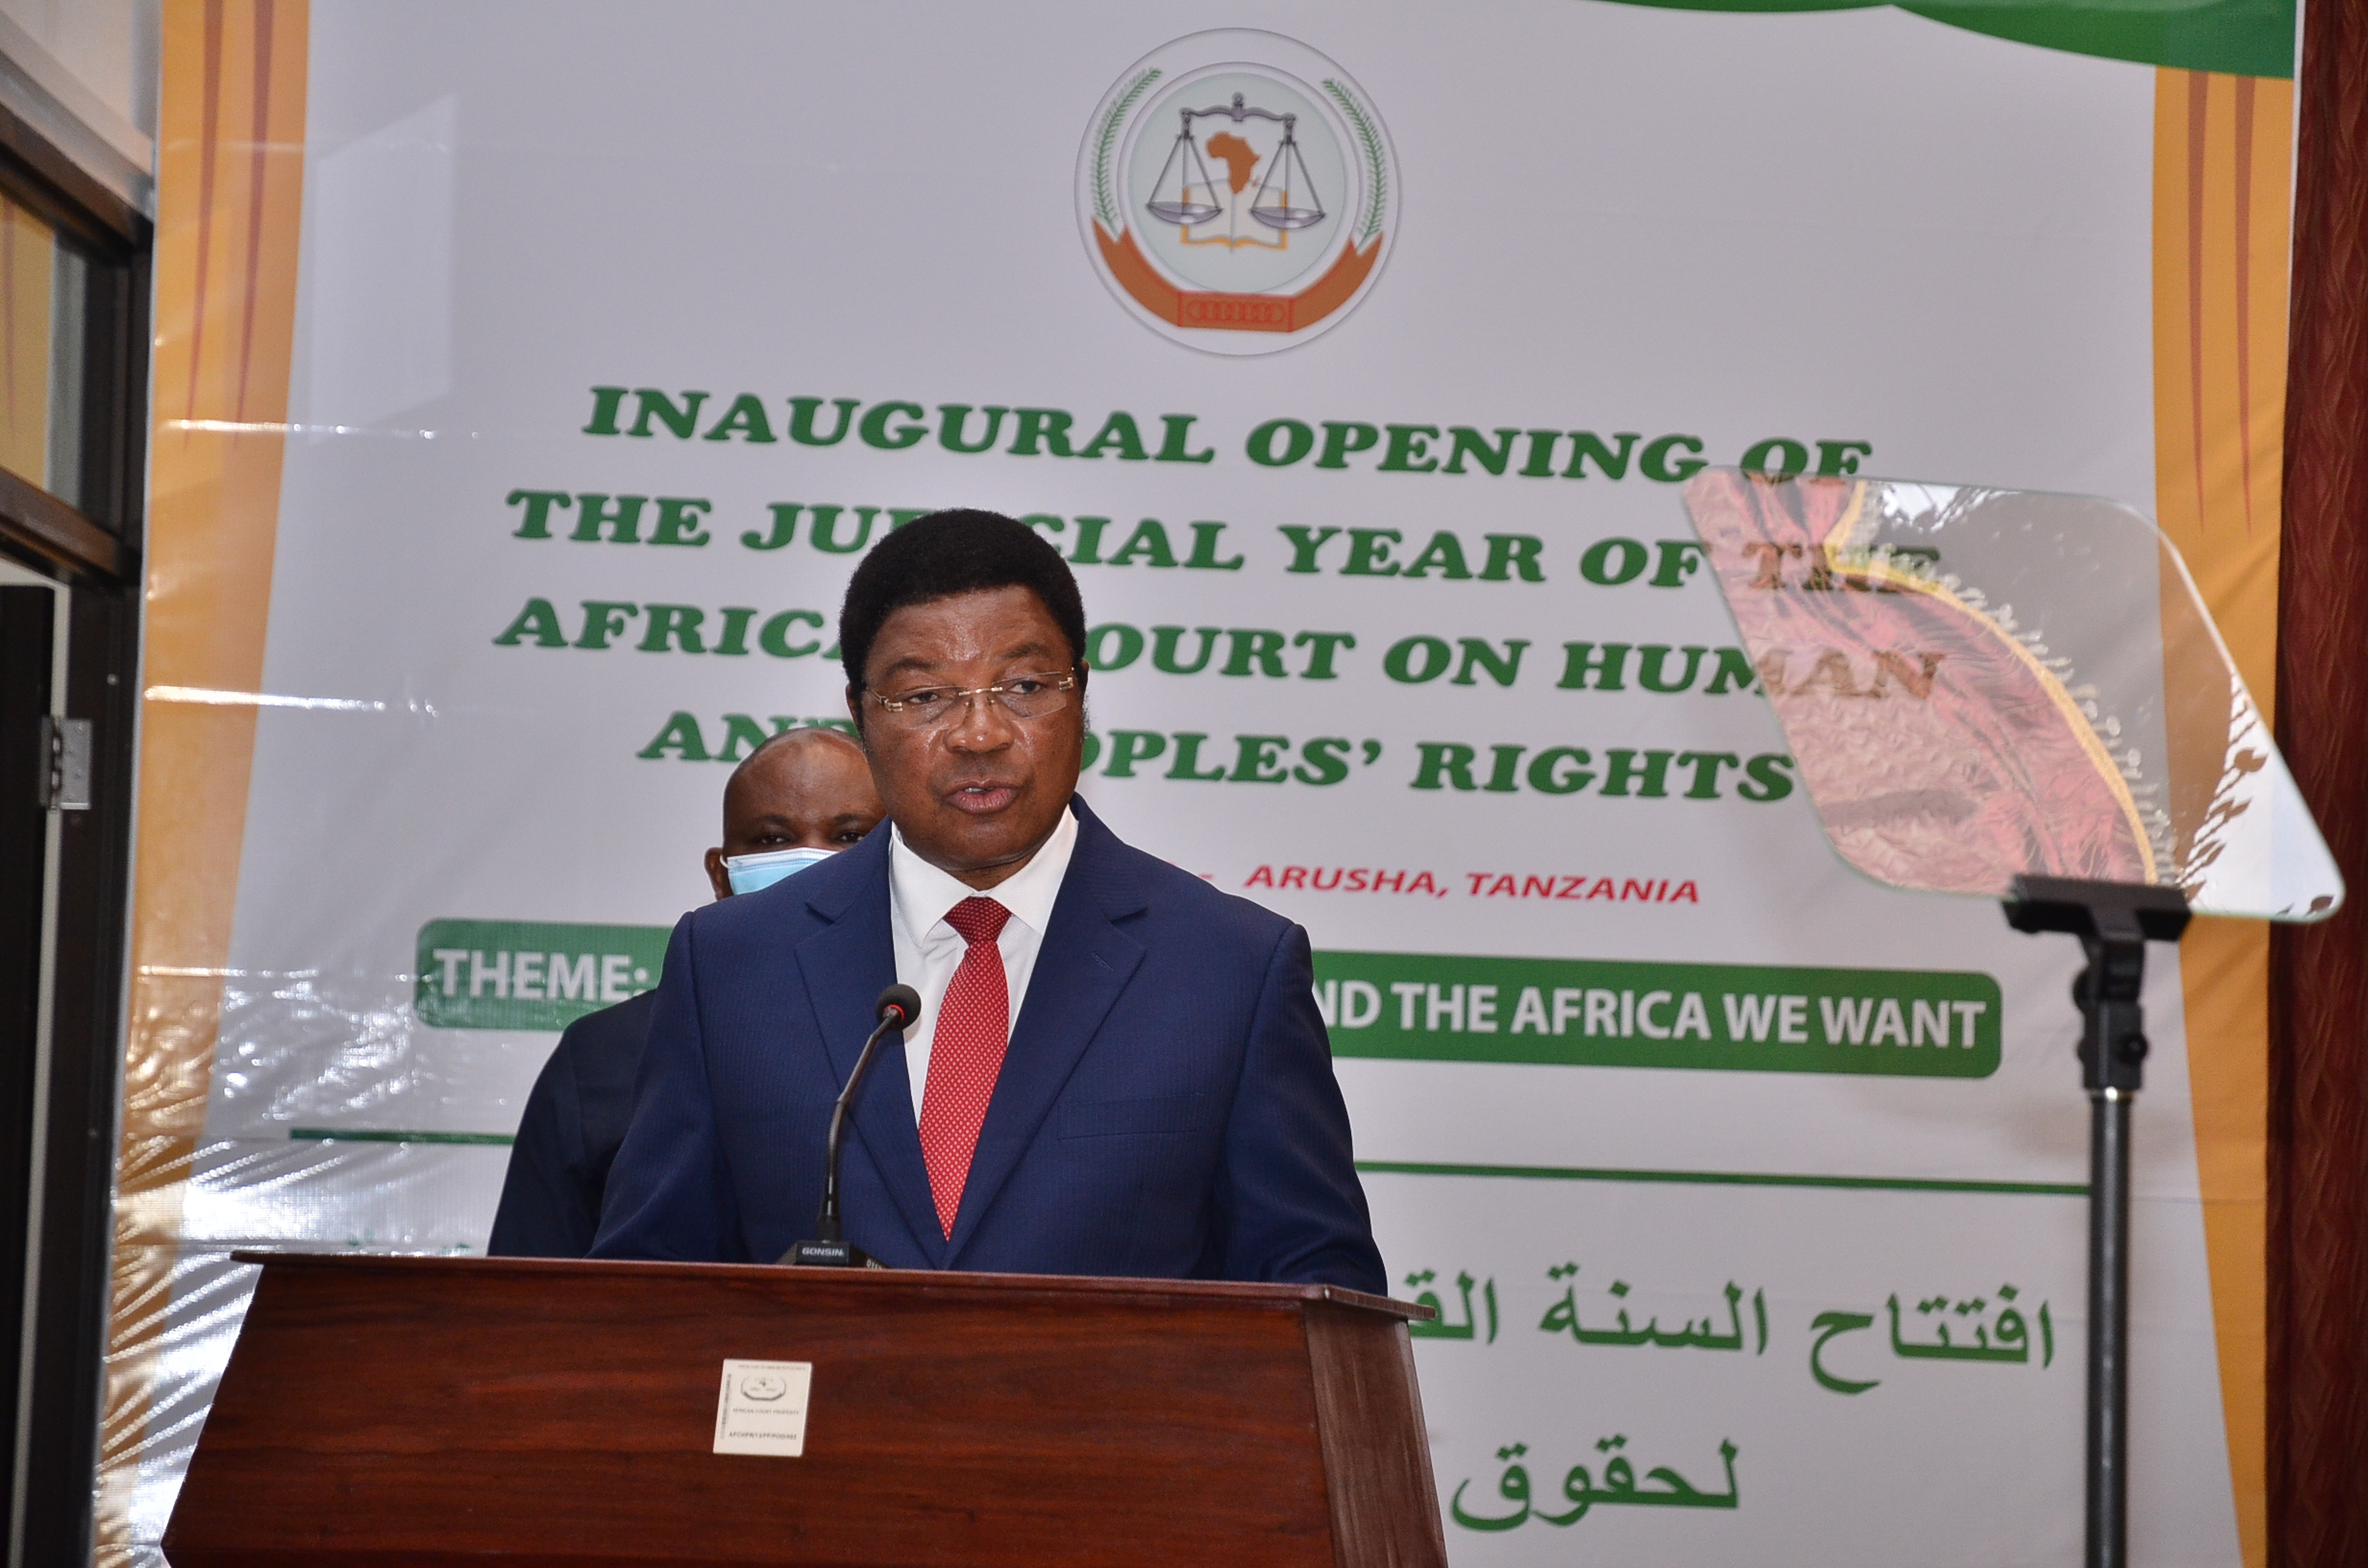 OPENING JUDICIAL YEAR: REMARKS BY HON. KASSIM MAJALIWA, PRIME MINISTER OF THE UNITED REPUBLIC OF TANZANIA